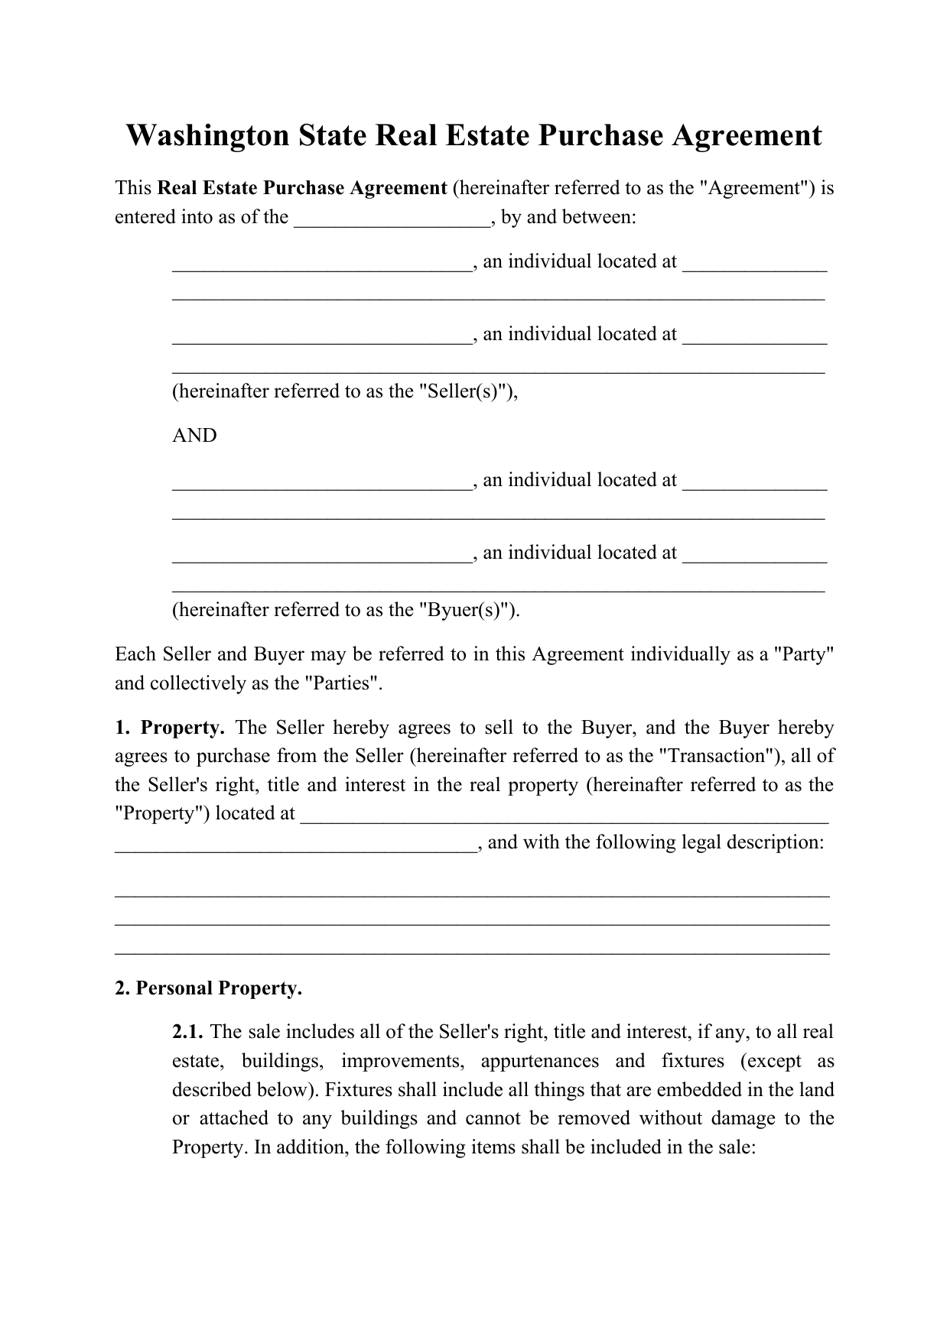 Real Estate Purchase Agreement Template - Washington, Page 1